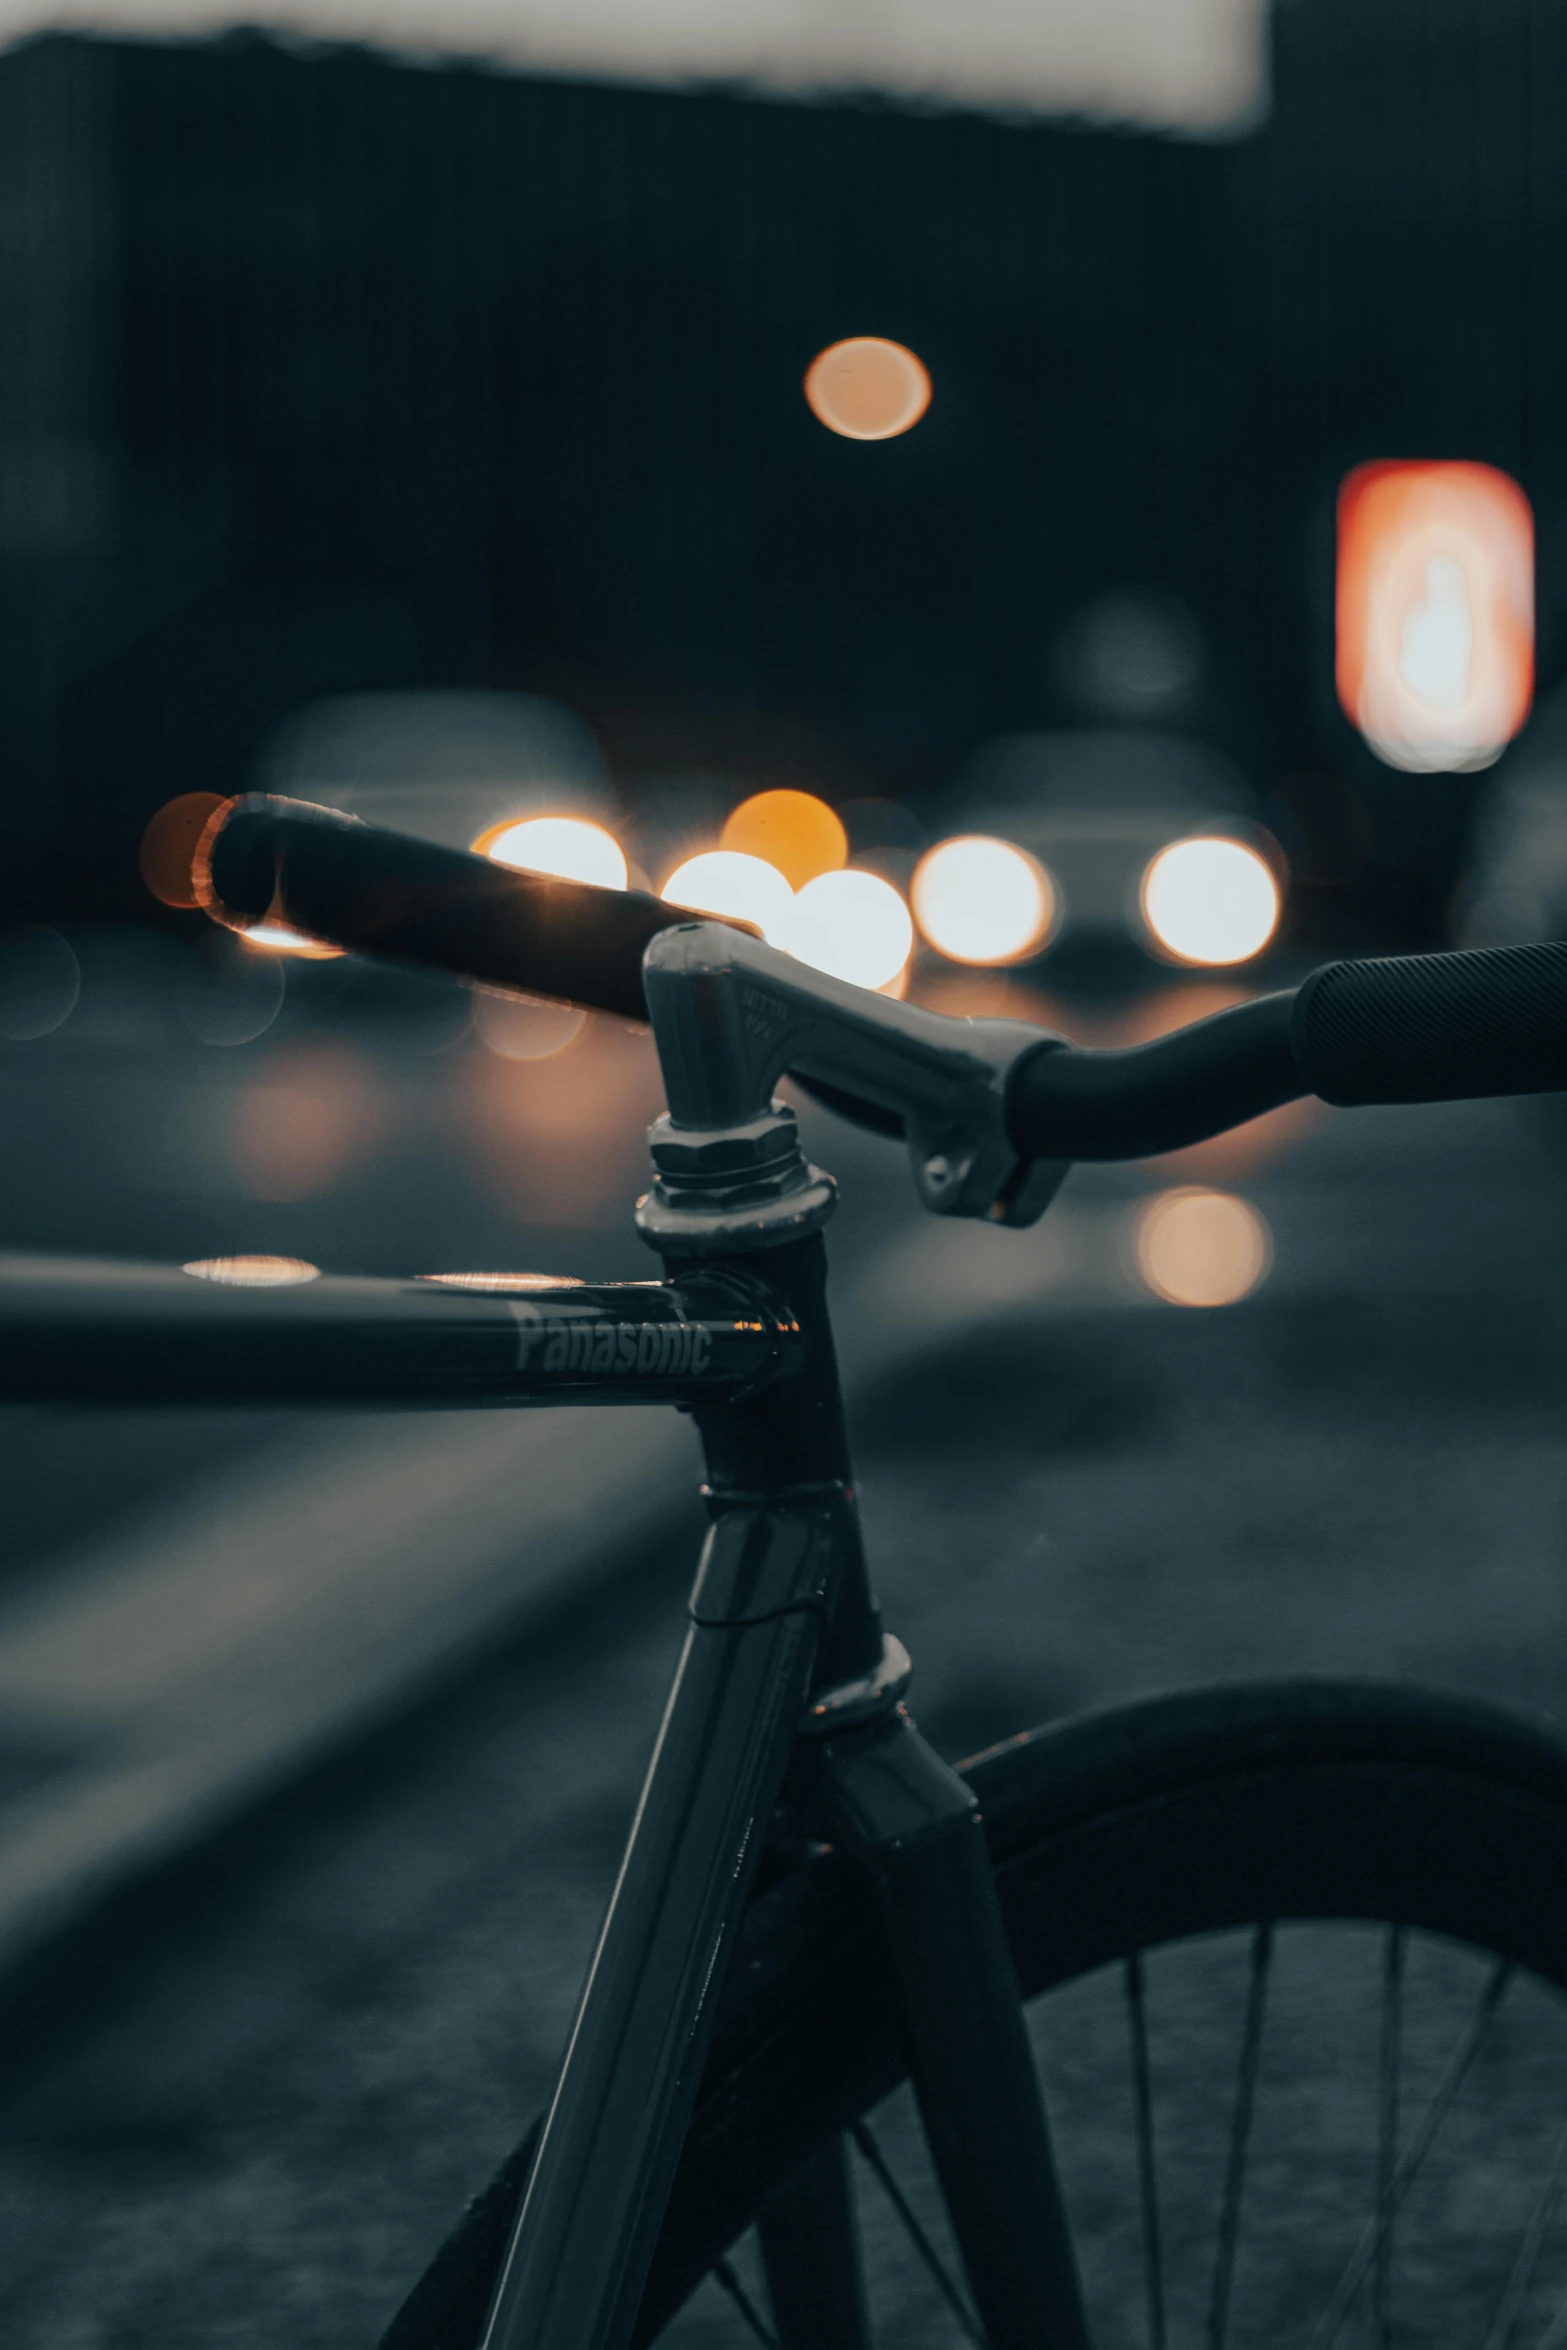 a bike is lit up in the dark with street lights in the background